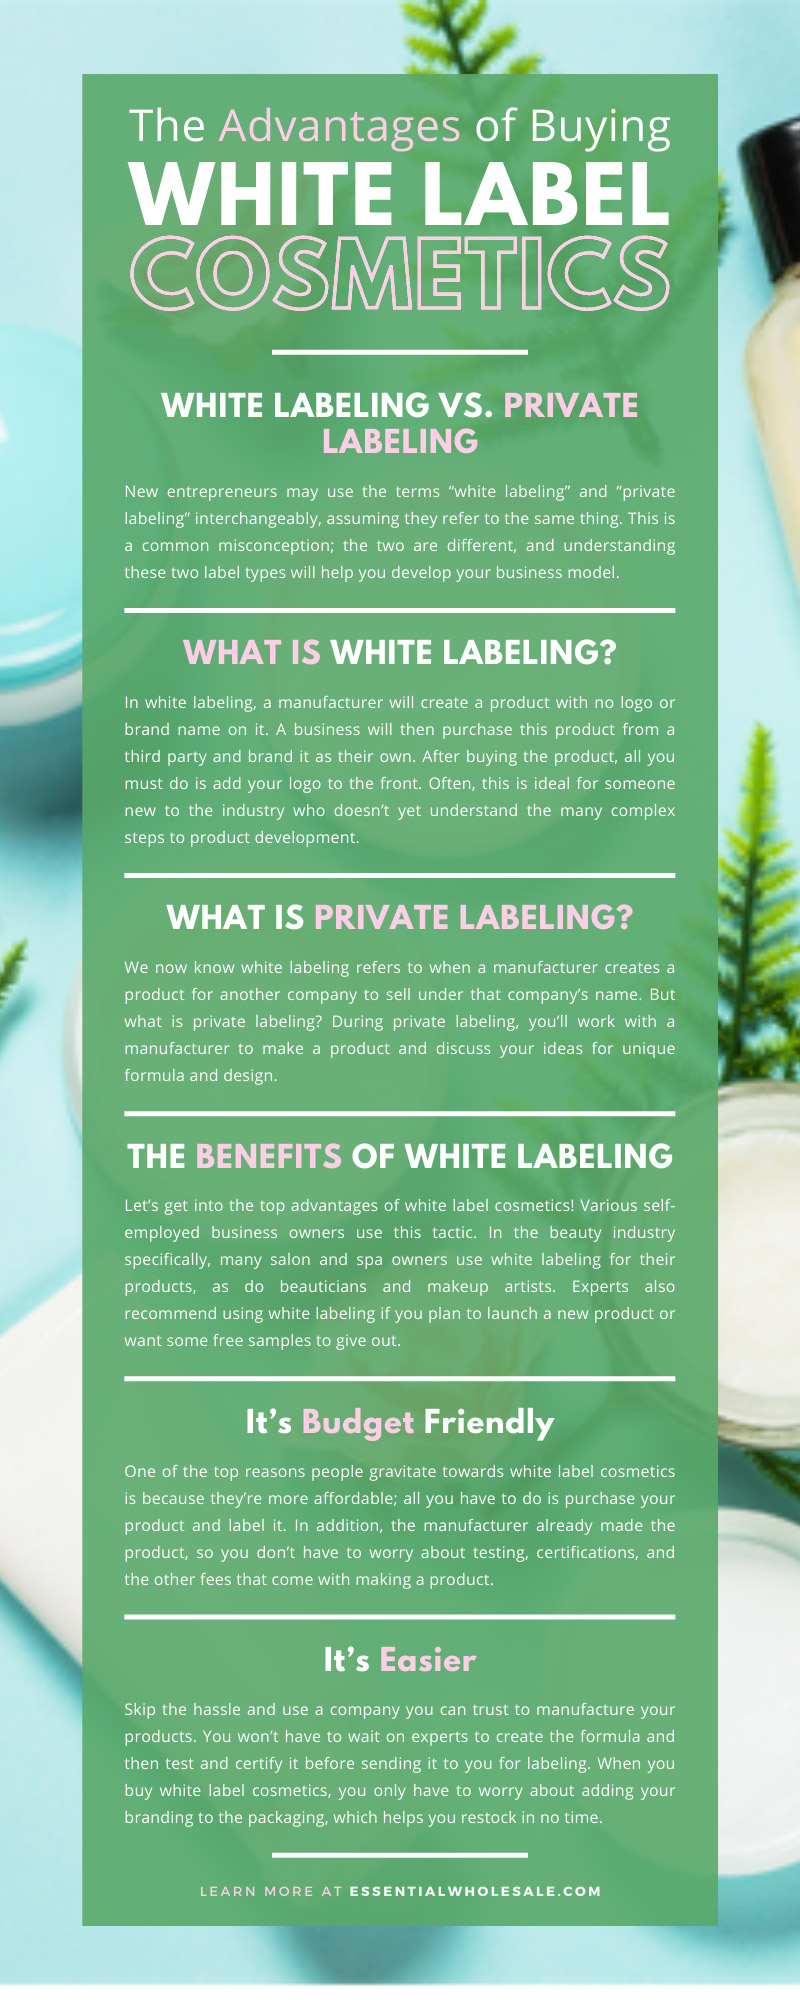 The Advantages of Buying White Label Cosmetics